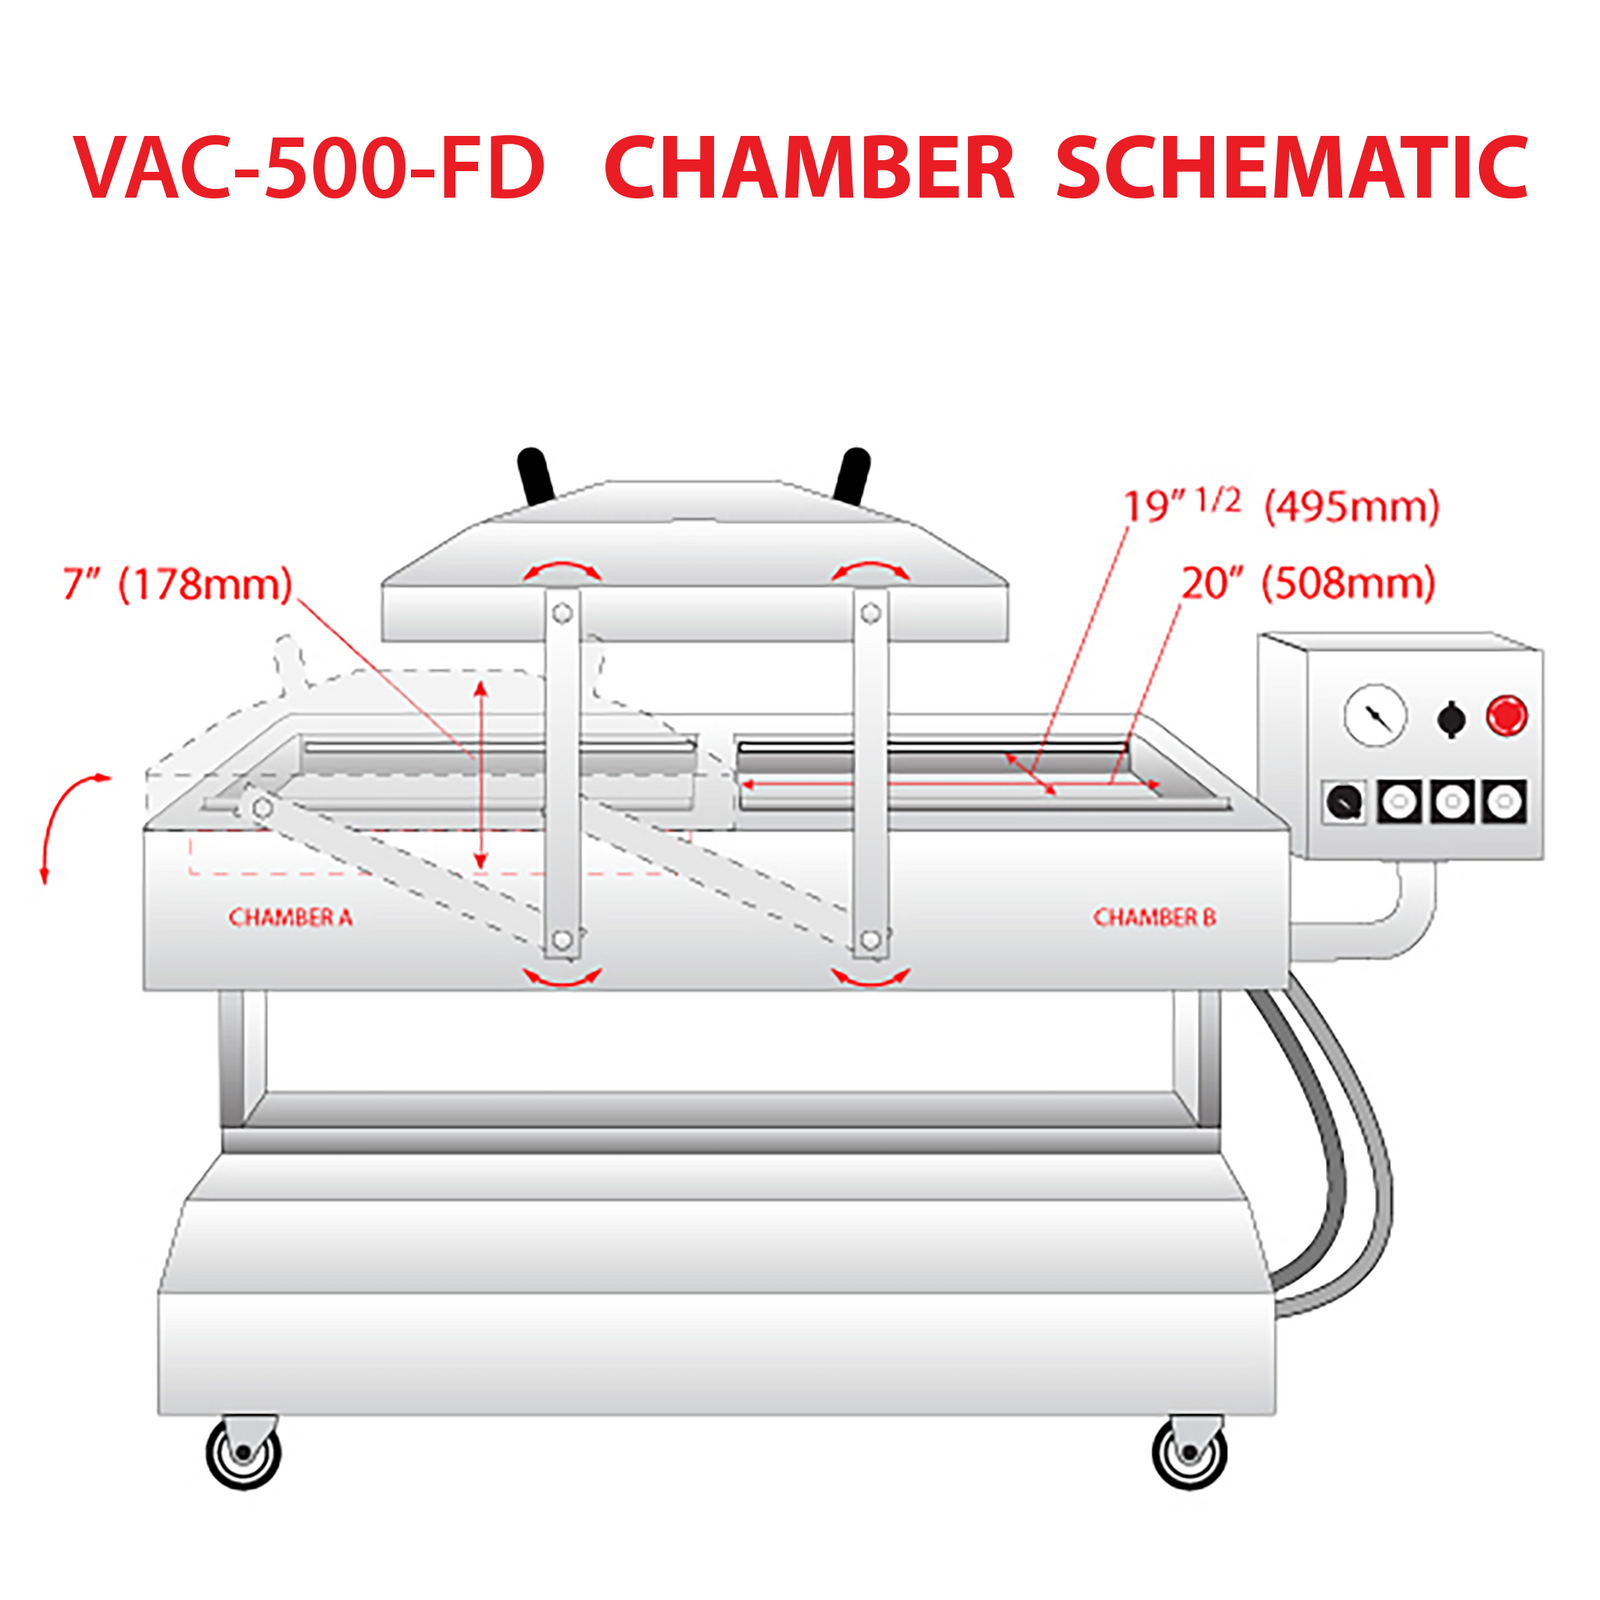 Measurements of the vacuum chambers of the reclinable commercial double chamber vacuum bag sealer